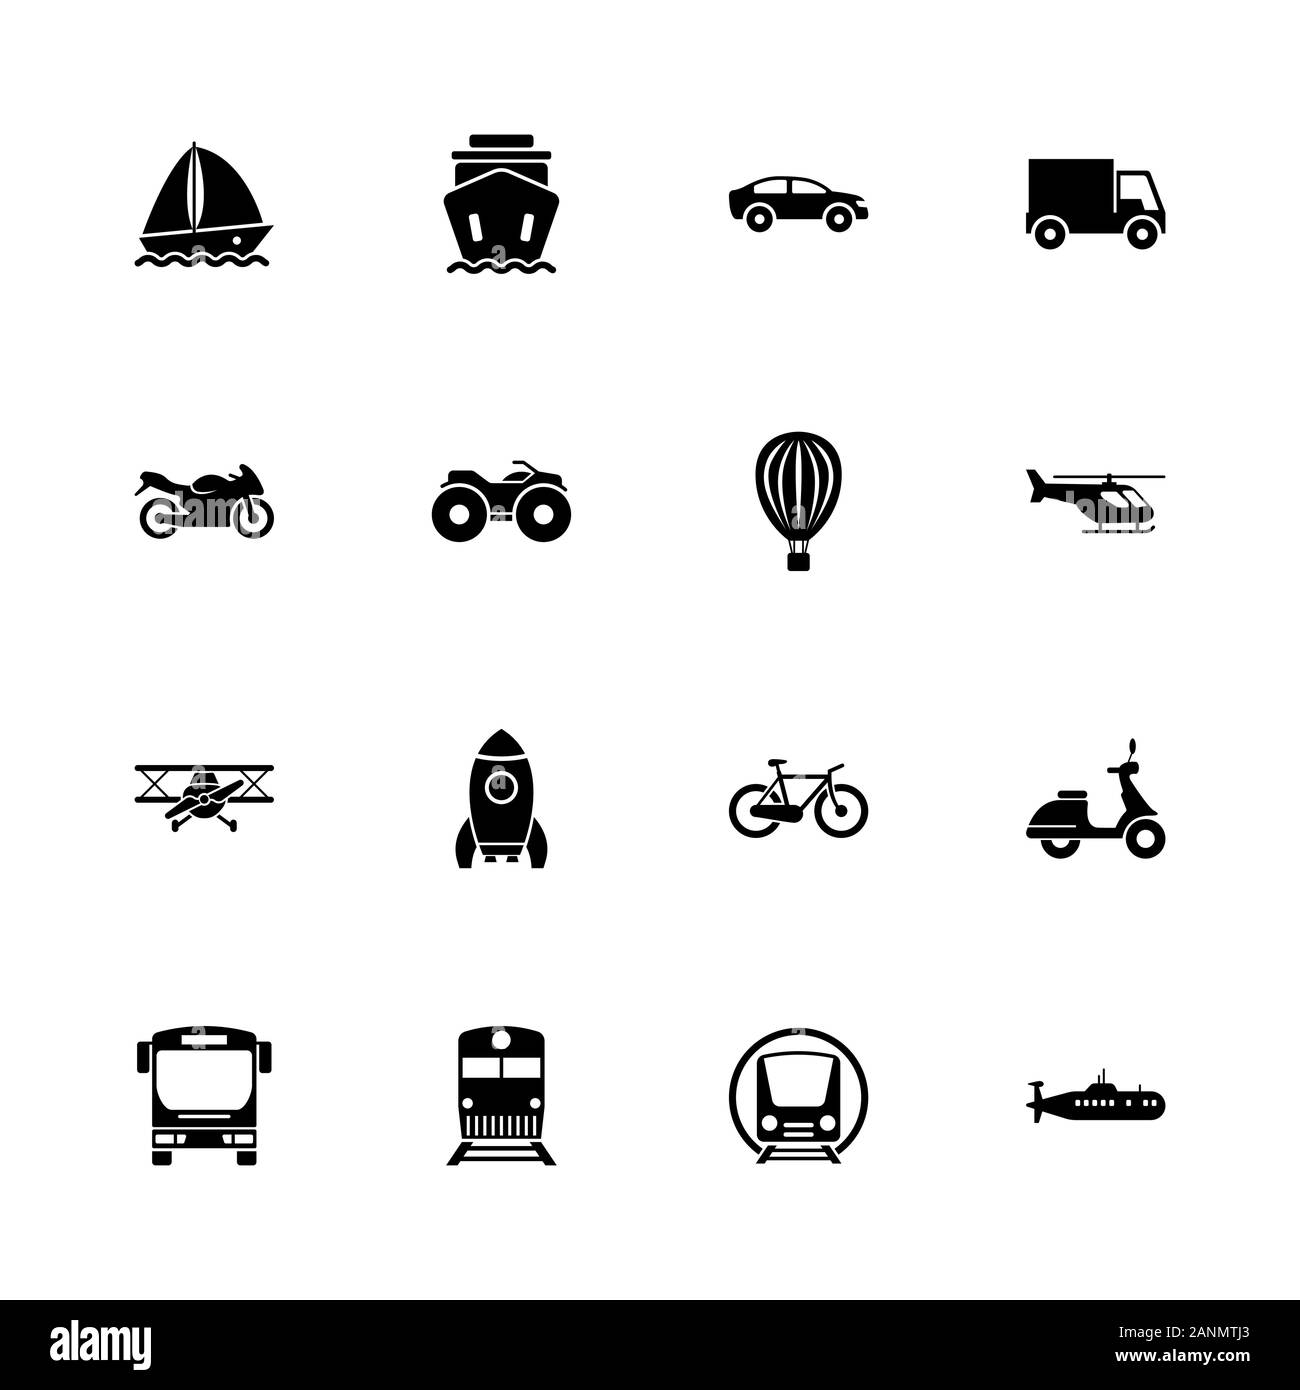 Transport icons - Expand to any size - Change to any colour. Flat Vector Icons - Black Illustration on White Background. Stock Vector